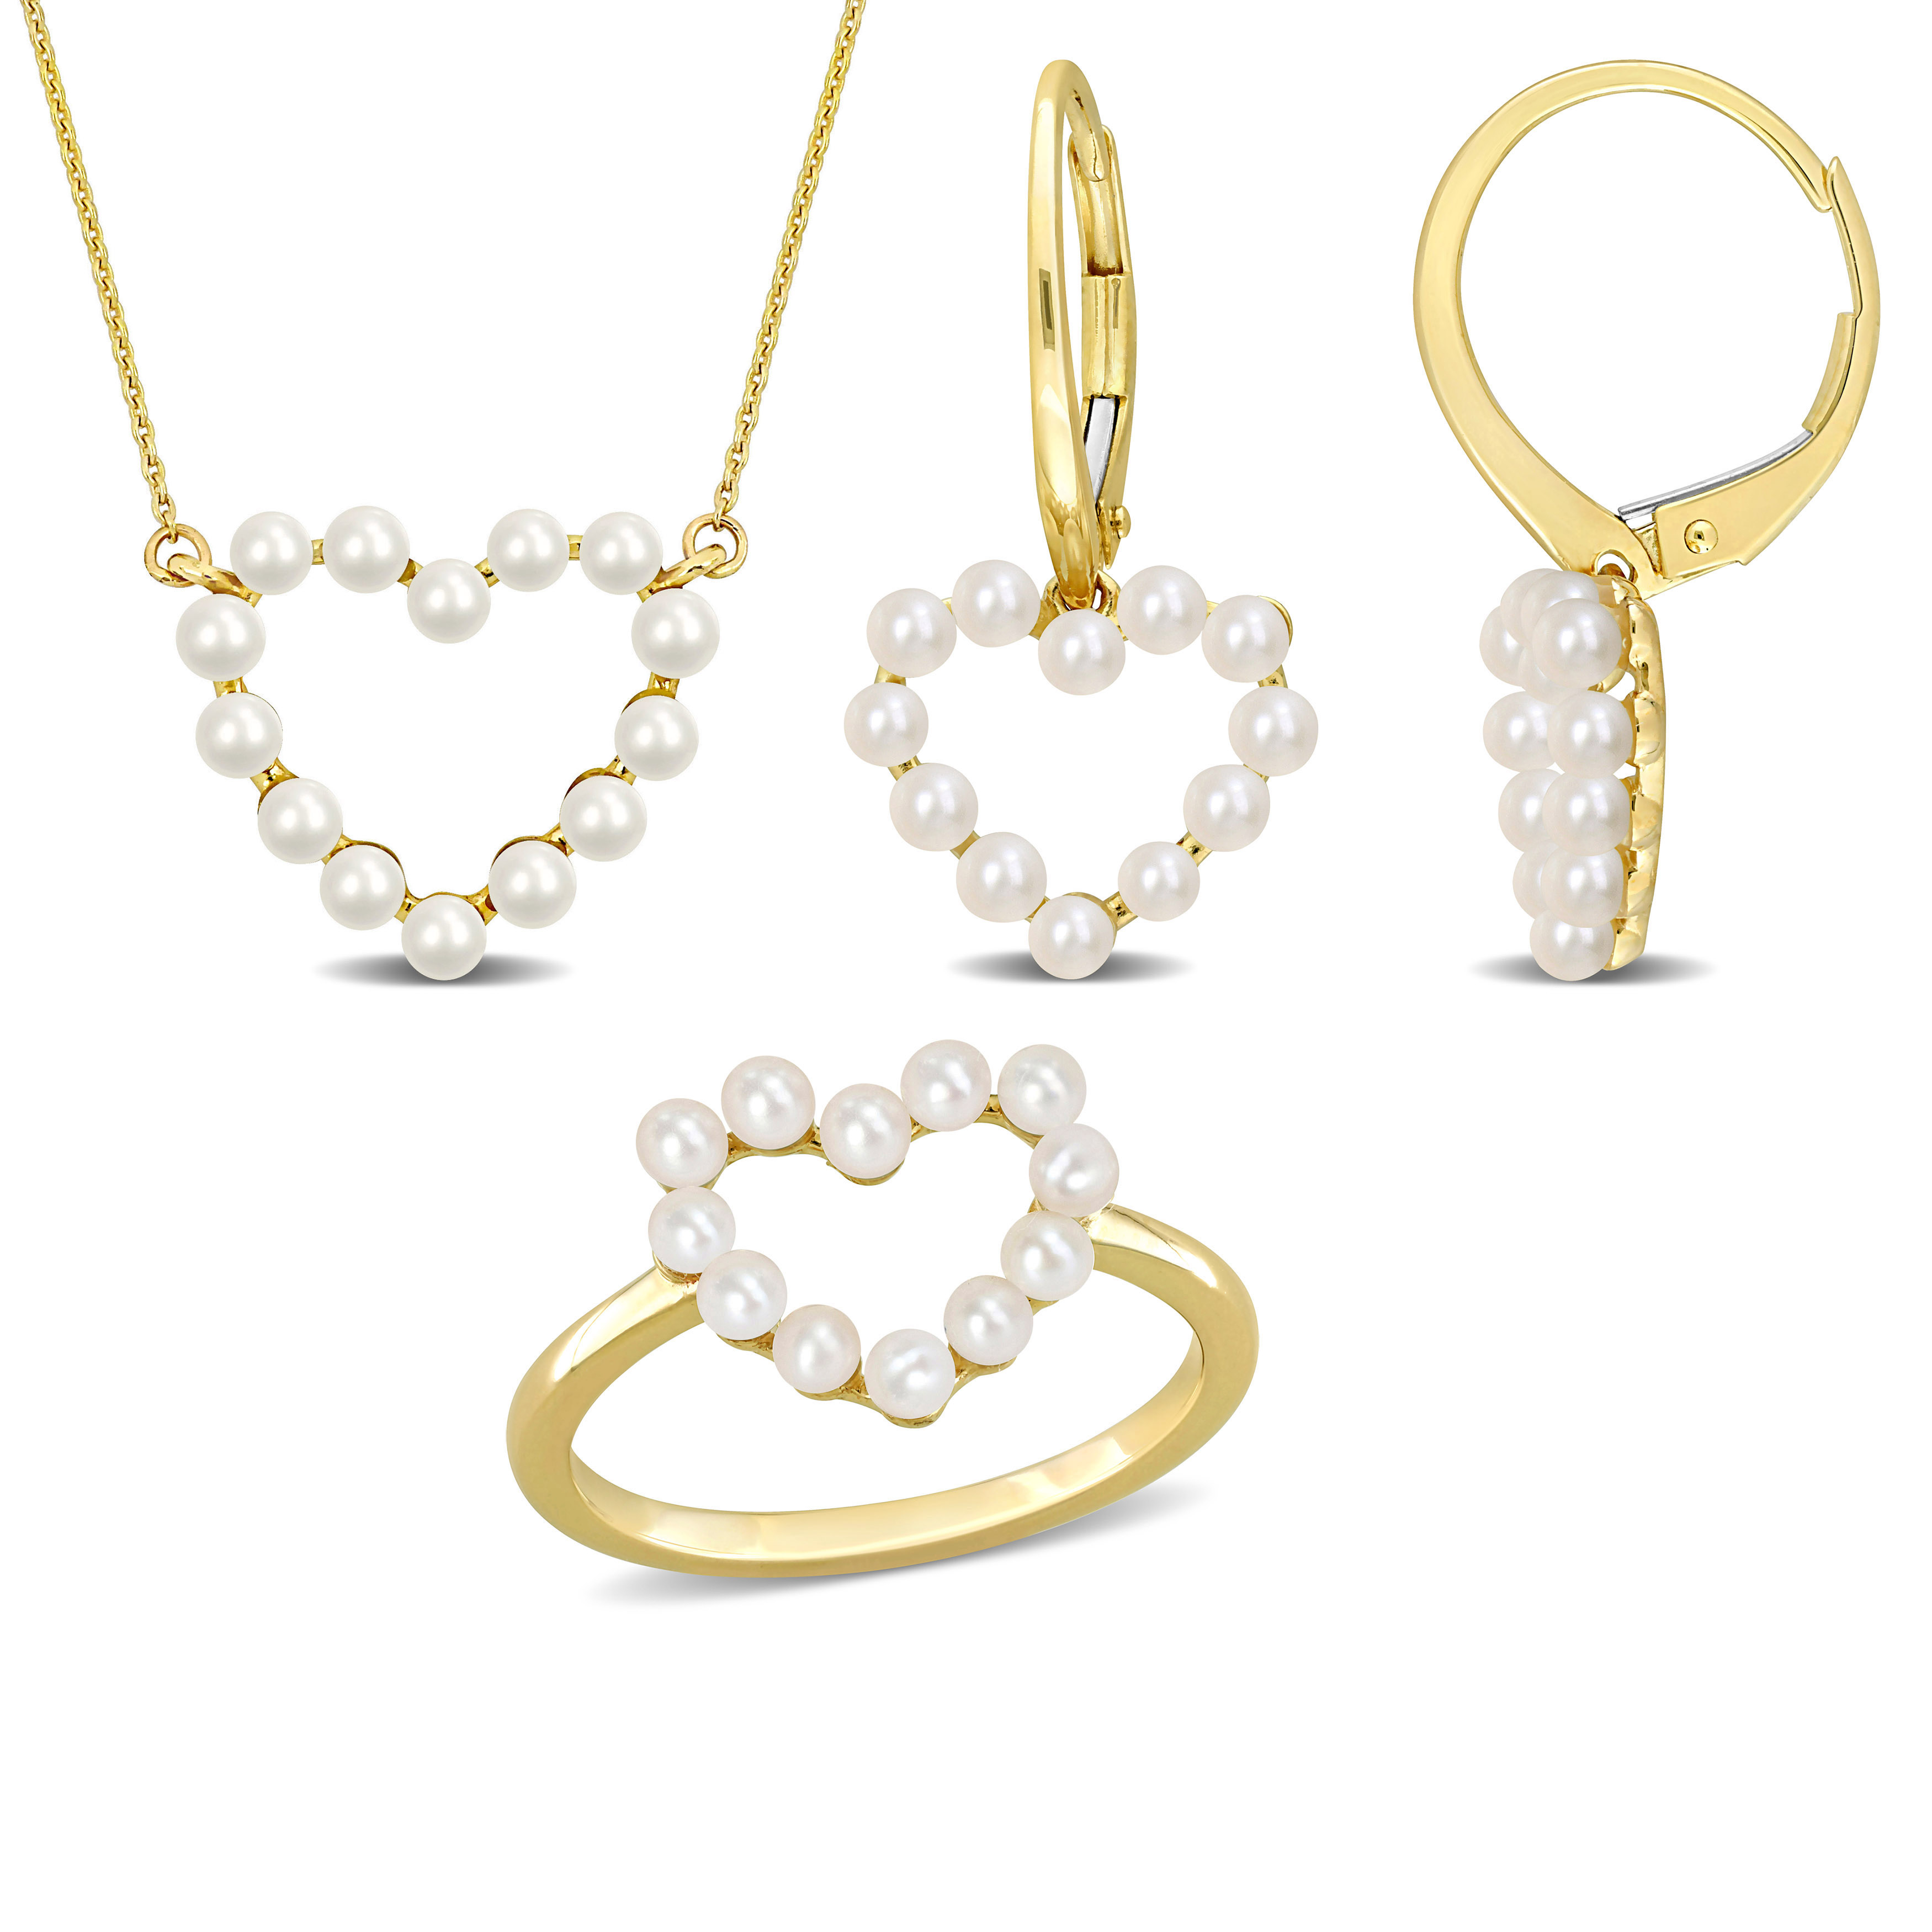 Cultured Freshwater Pearl 3-Piece Jewelry Set - Heart Pendant with Chain, Earrings and Ring in 14k Yellow Gold